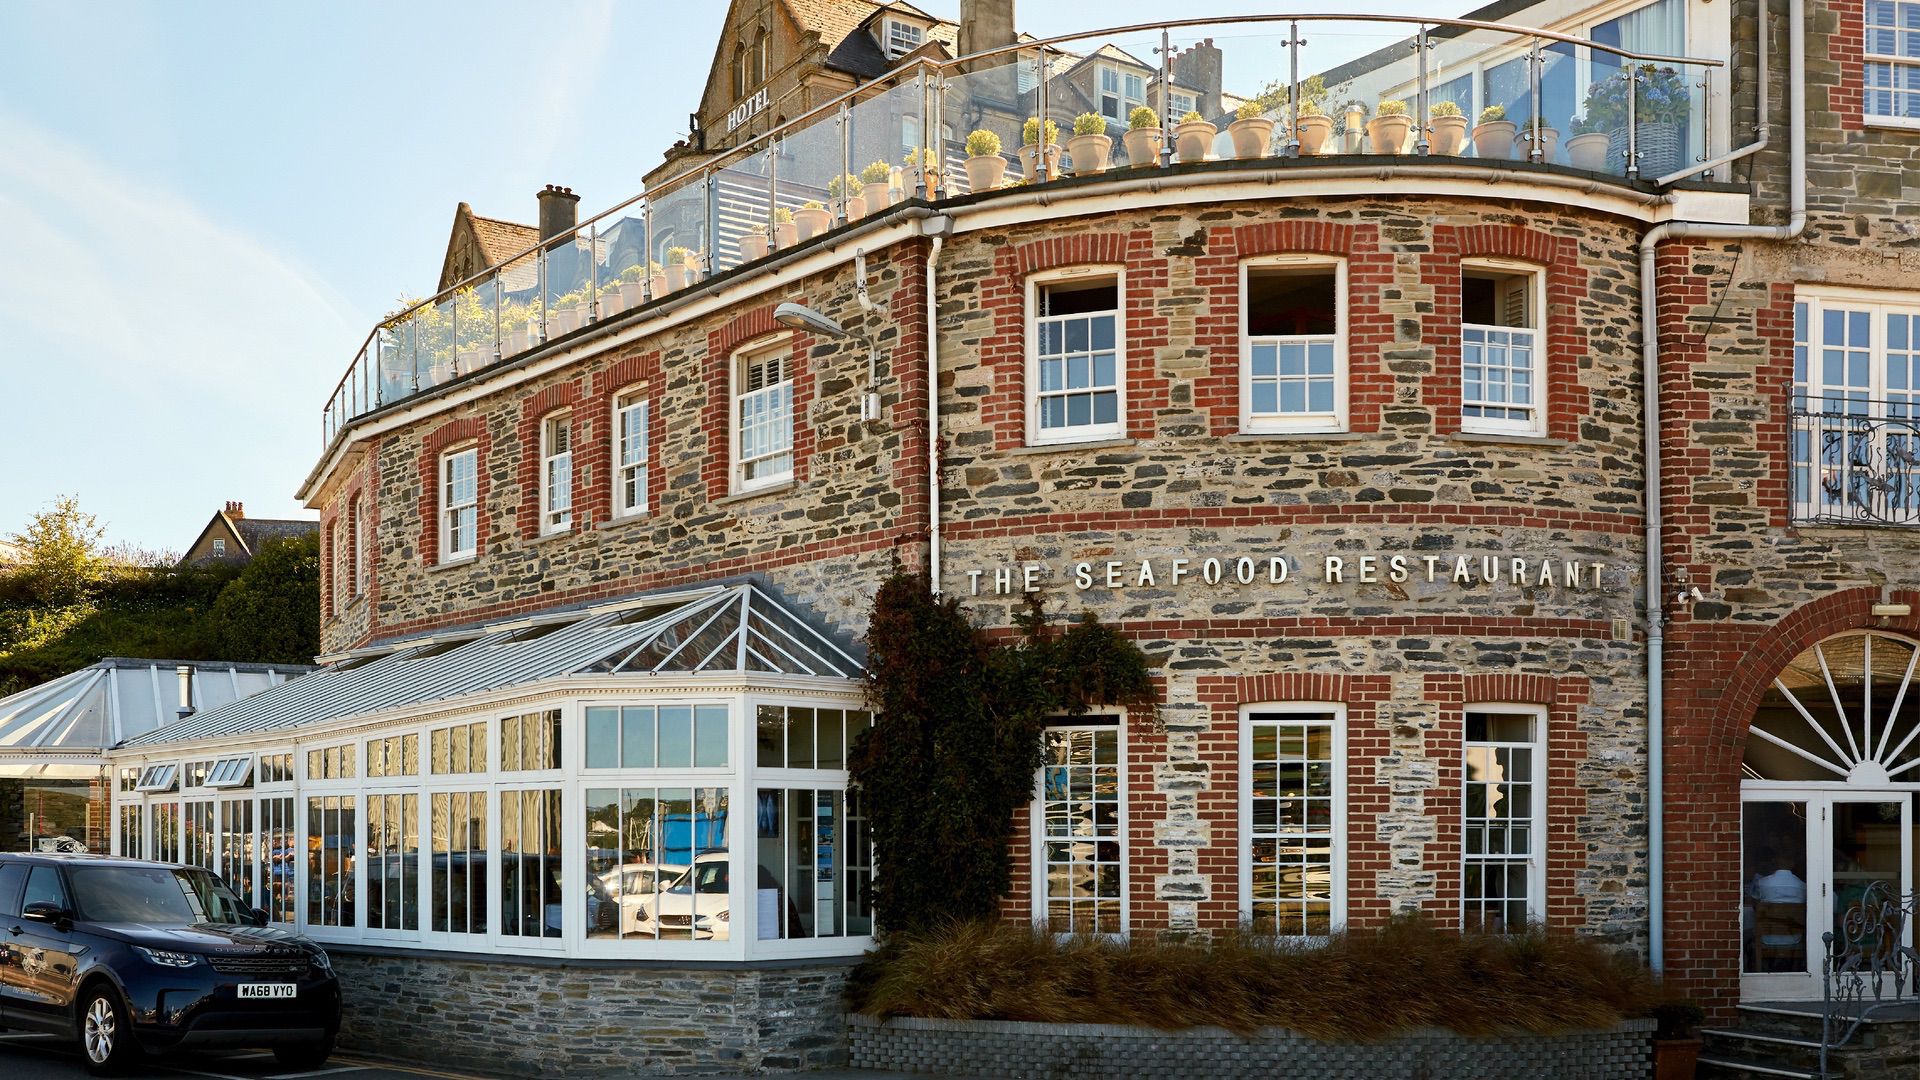 Rick Stein's Seafood Restaurant, Padstow - Exterior.